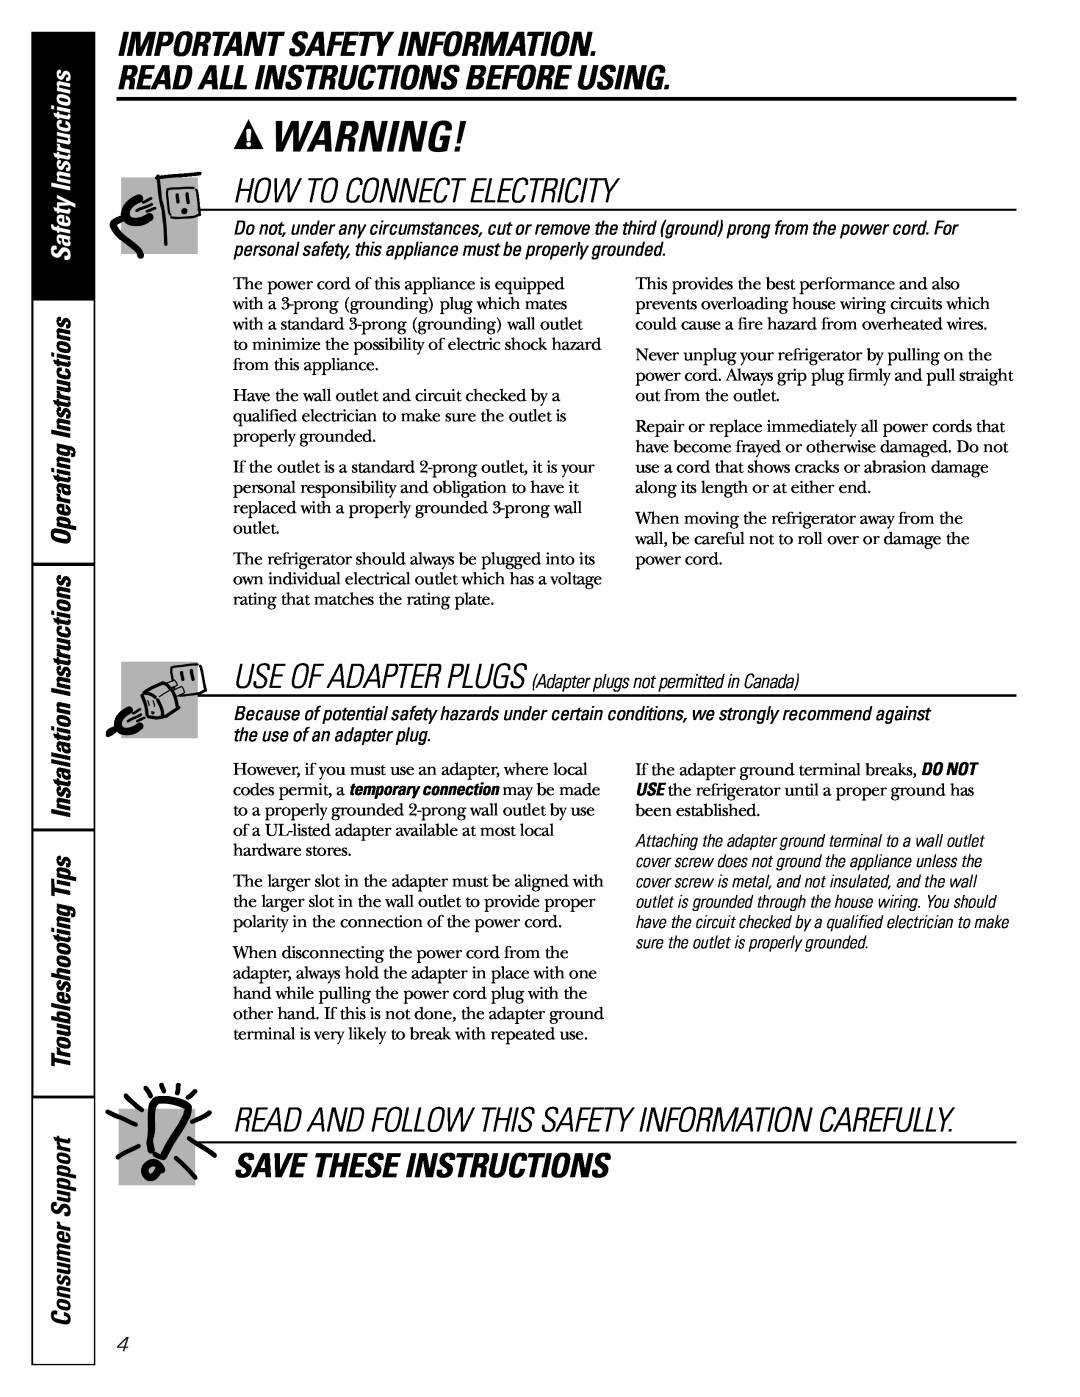 GE How To Connect Electricity, Save These Instructions, Troubleshooting Tips, Consumer Support, Safety Instructions 